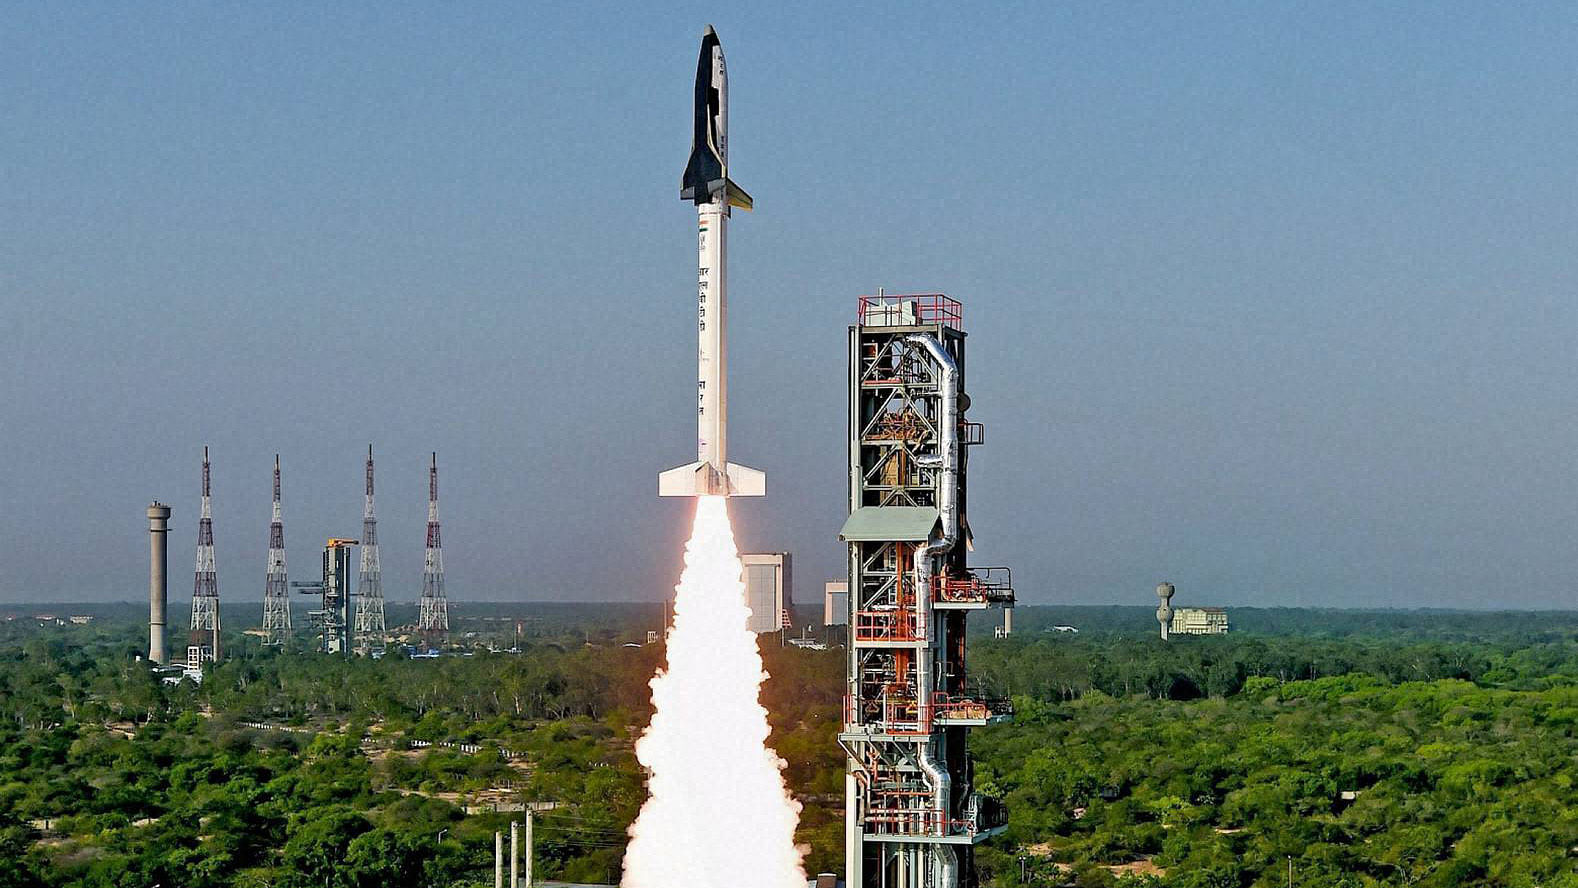 Last Monday ISRO launched India’s first indigenously made space shuttle- the Reusable Launch Vehicle (RLV) in Sriharikota, Andhra Pradesh. (Photo: PTI)